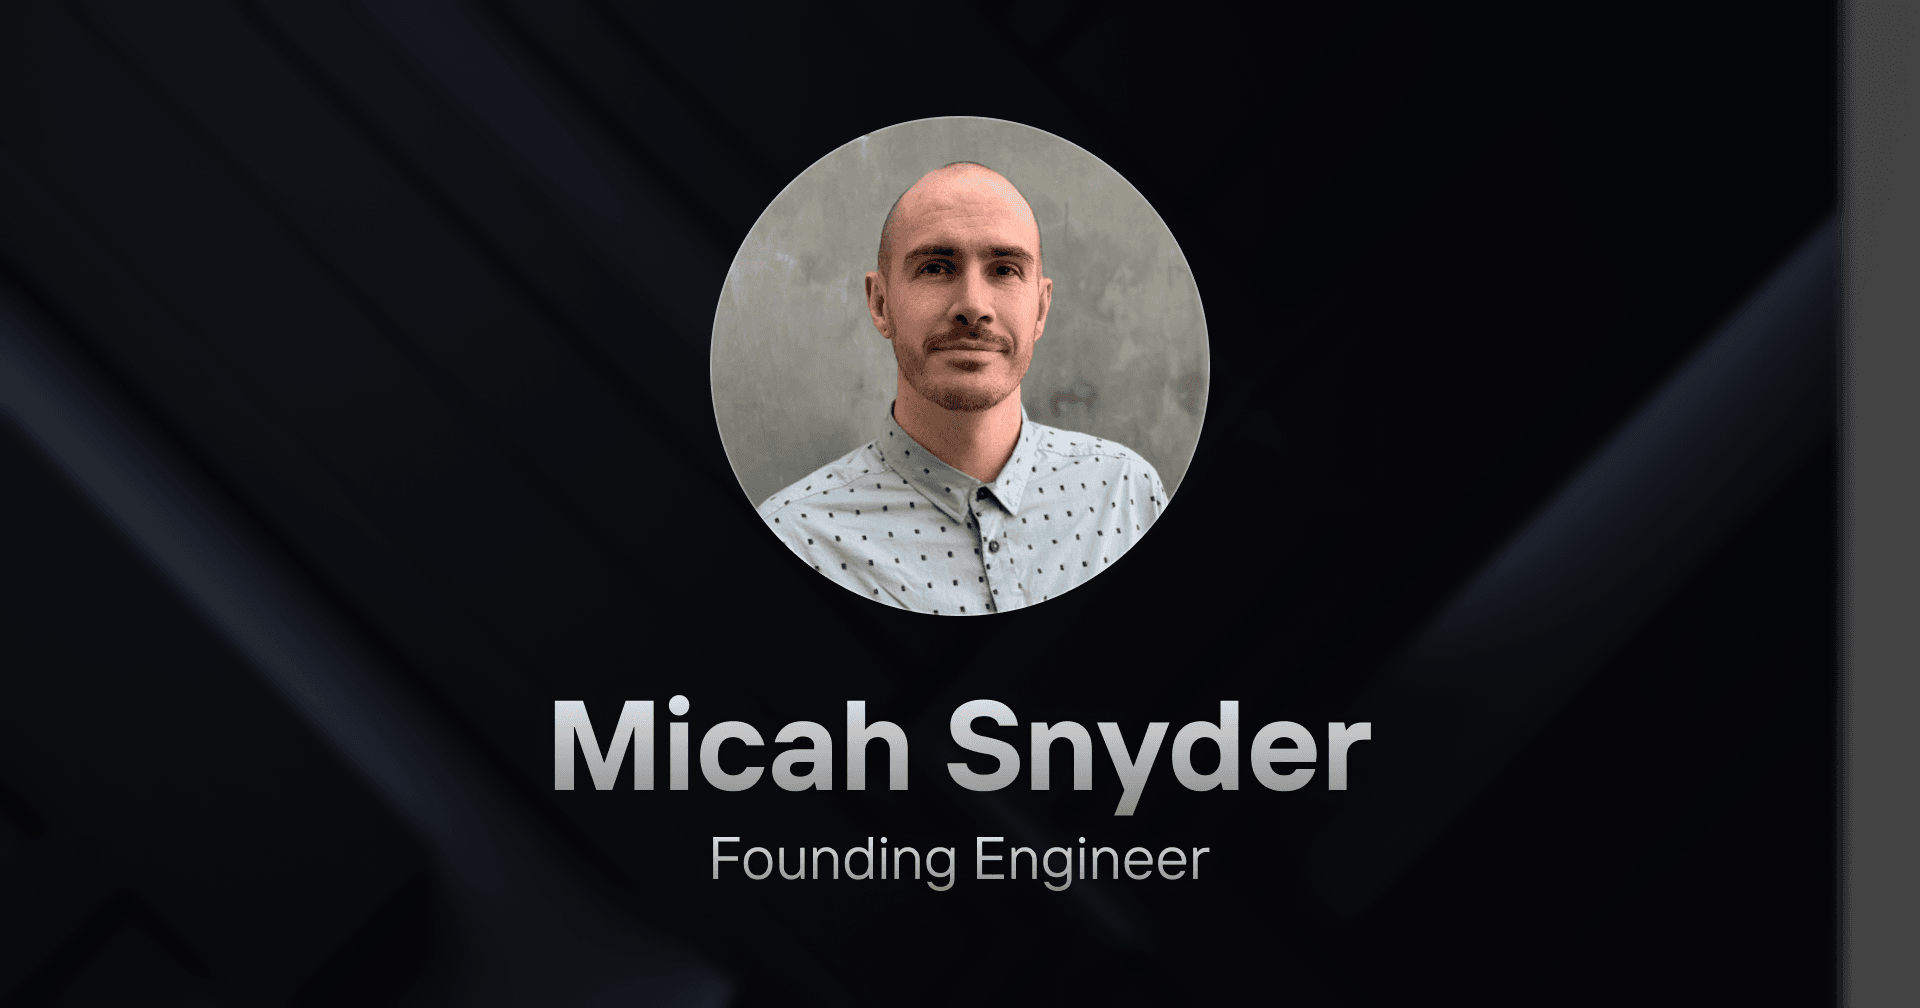 Micah Snyder joins Frigade as Founding Engineer